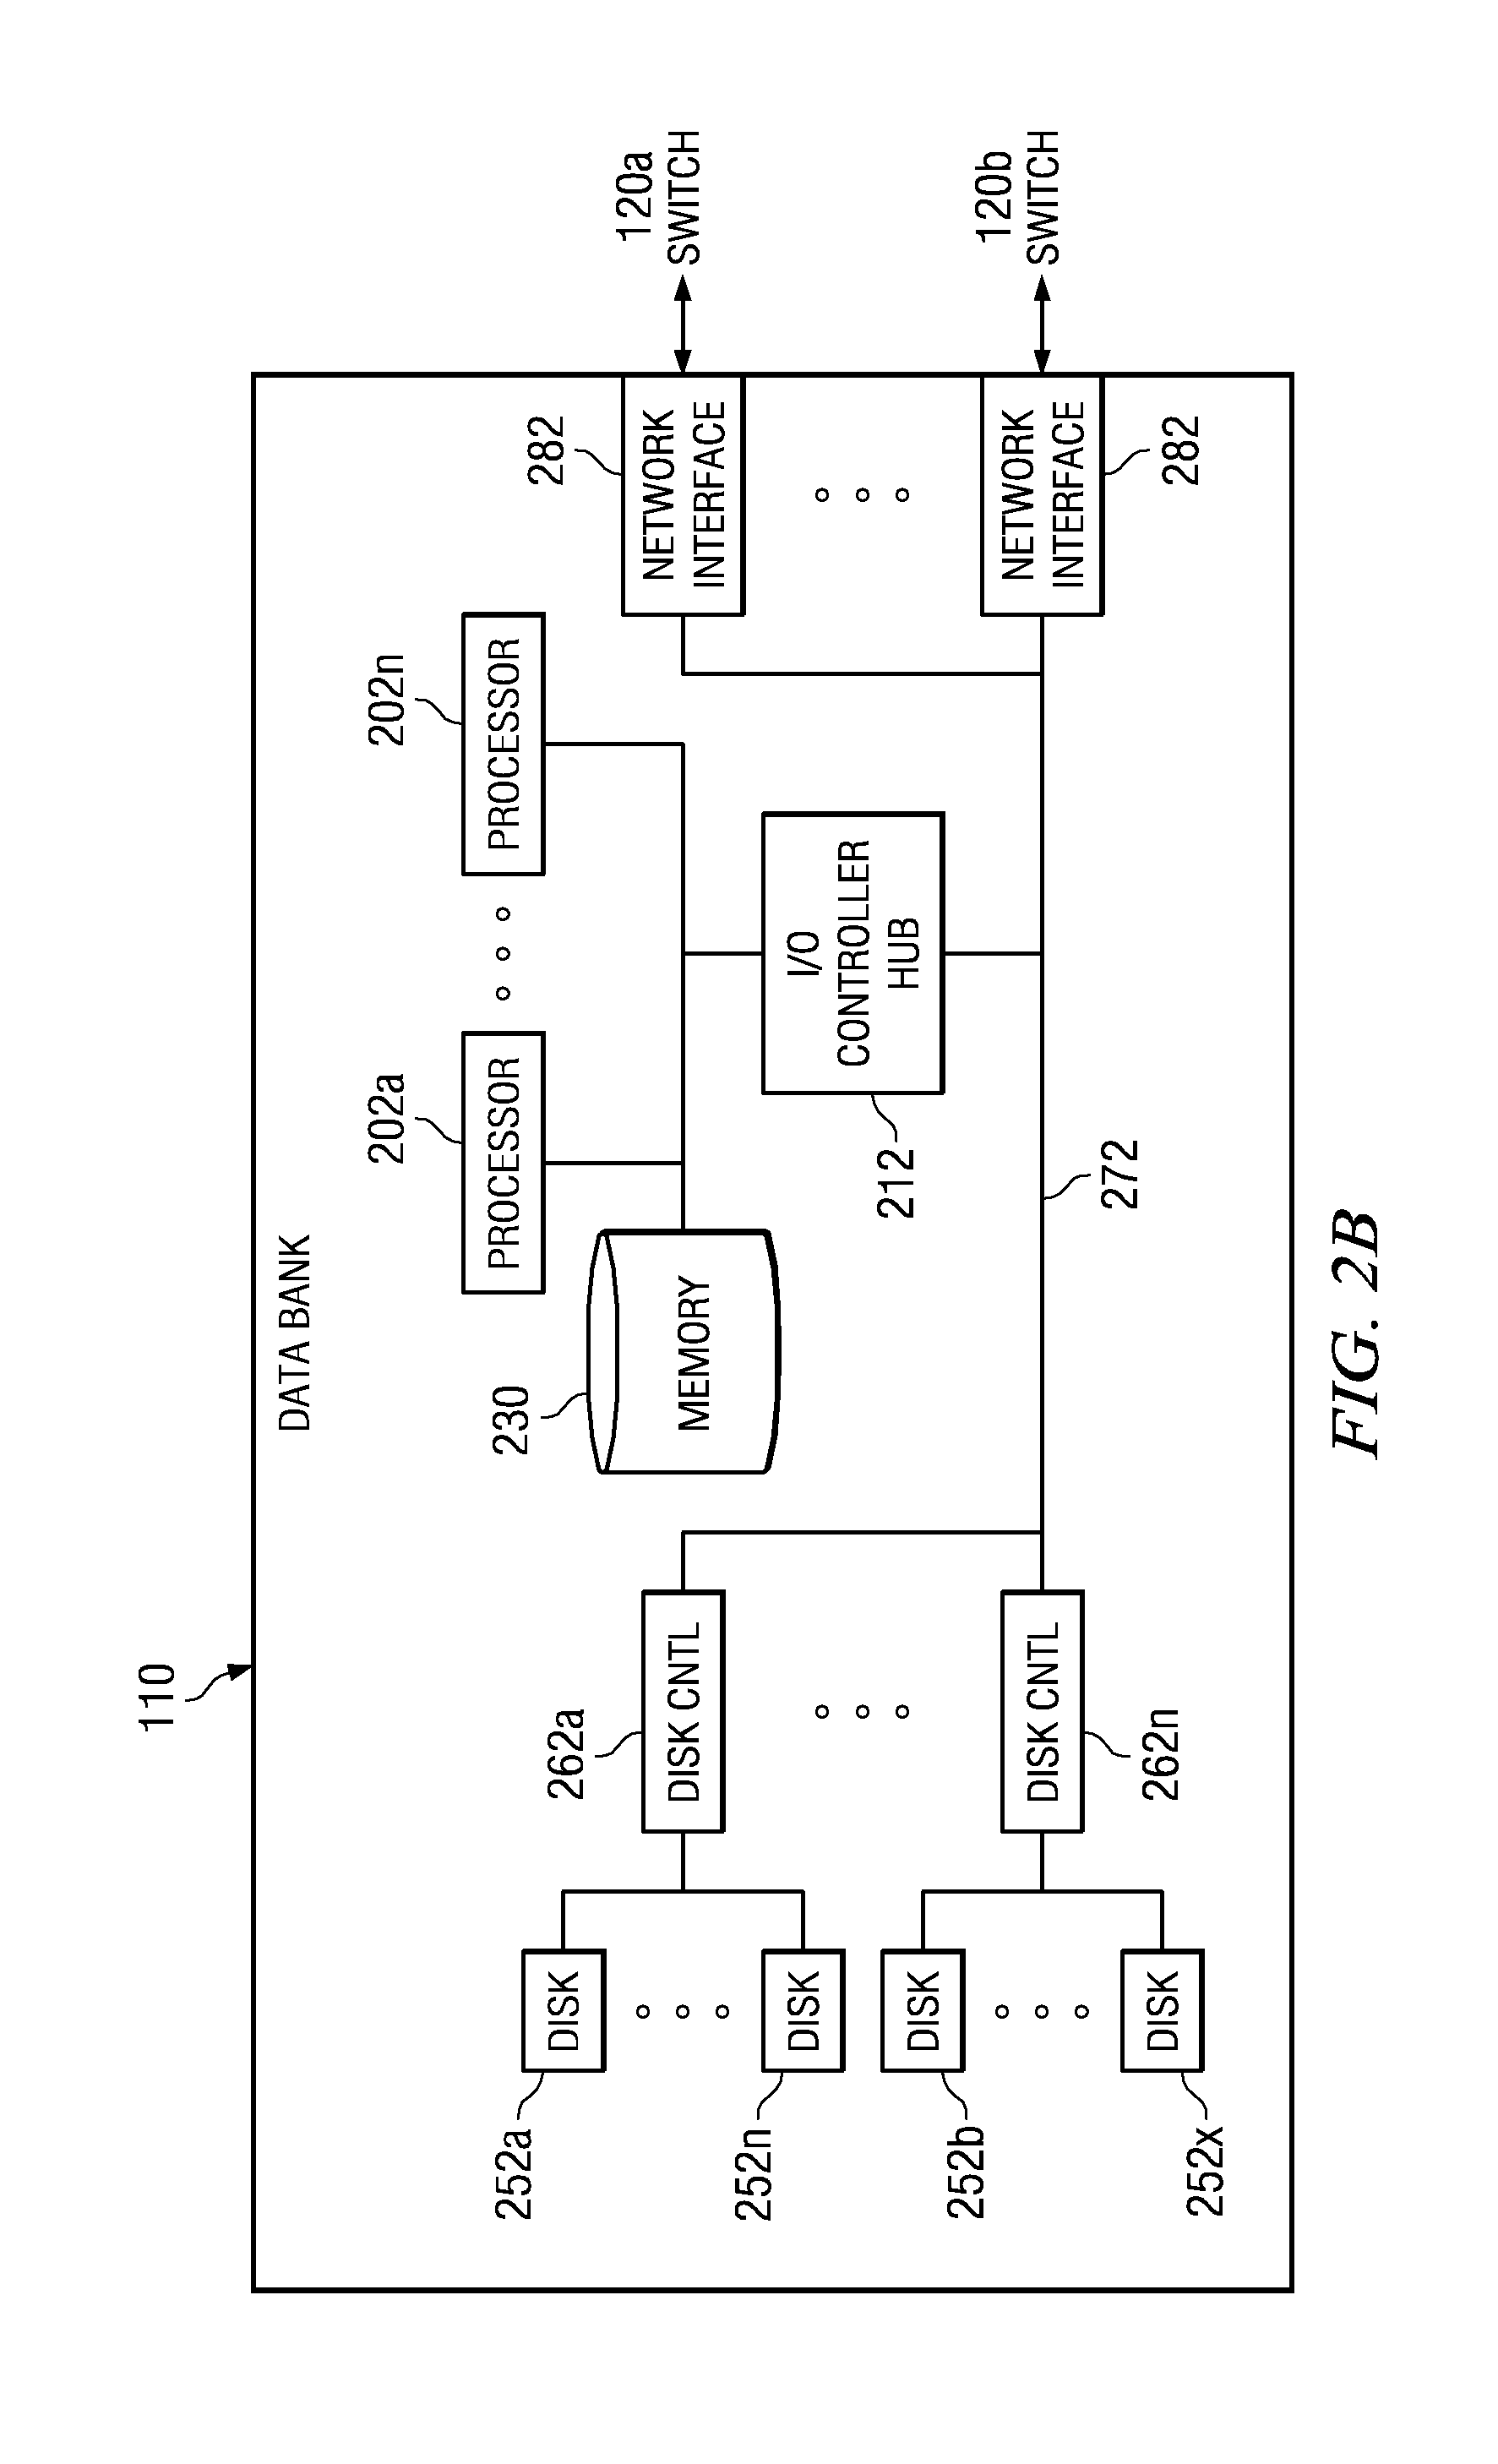 Method and system for placement of data on a storage device